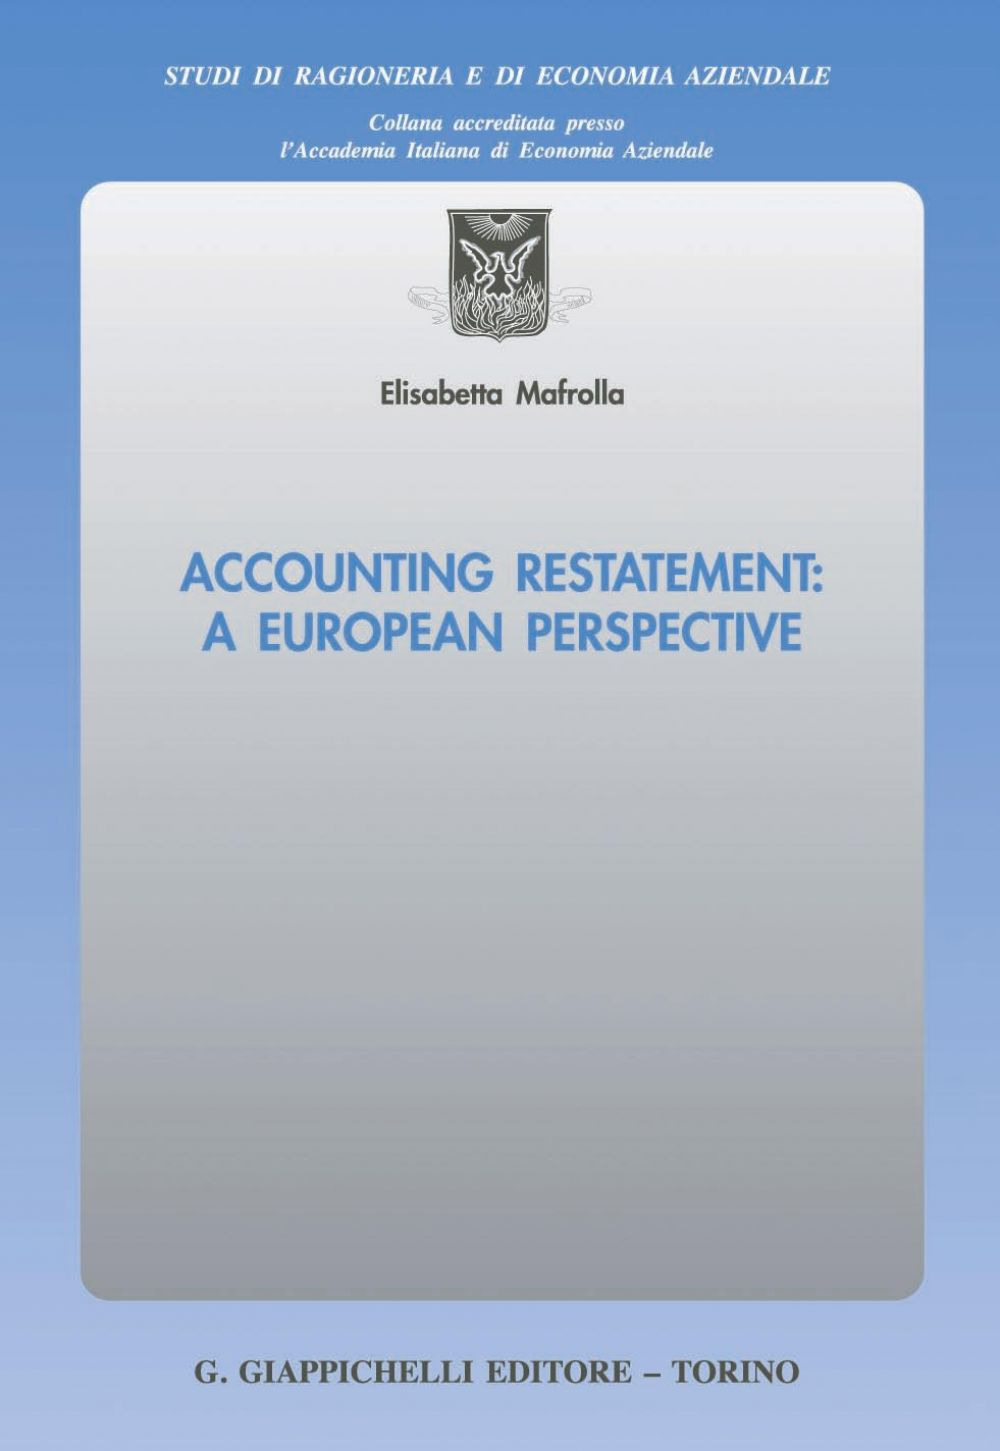 Accounting restatement: a European perspective